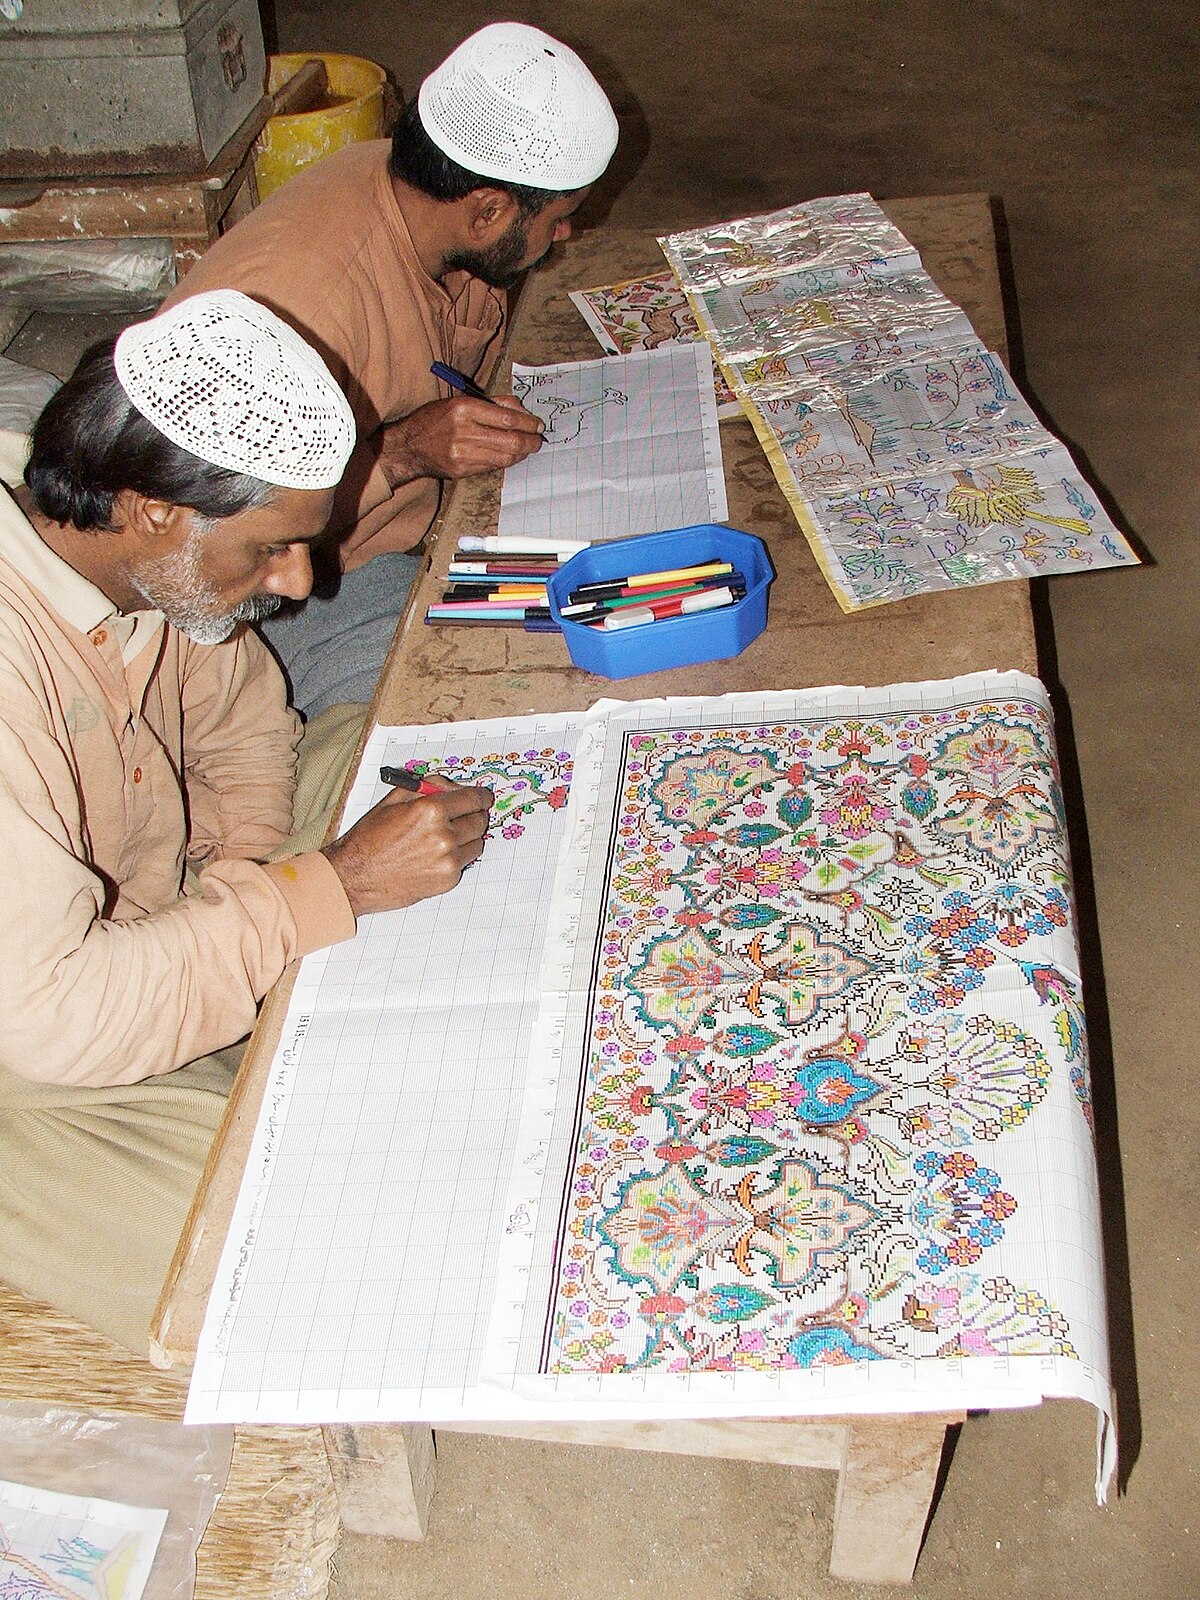 https://upload.wikimedia.org/wikipedia/commons/thumb/5/5d/Correctional_Activities_at_Central_Jail_Faisalabad%2C_Pakistan_in_2010_-_Convict_artists_busy_in_drawing_designs_of_carpets_on_graph_papers.JPG/1200px-Correctional_Activities_at_Central_Jail_Faisalabad%2C_Pakistan_in_2010_-_Convict_artists_busy_in_drawing_designs_of_carpets_on_graph_papers.JPG